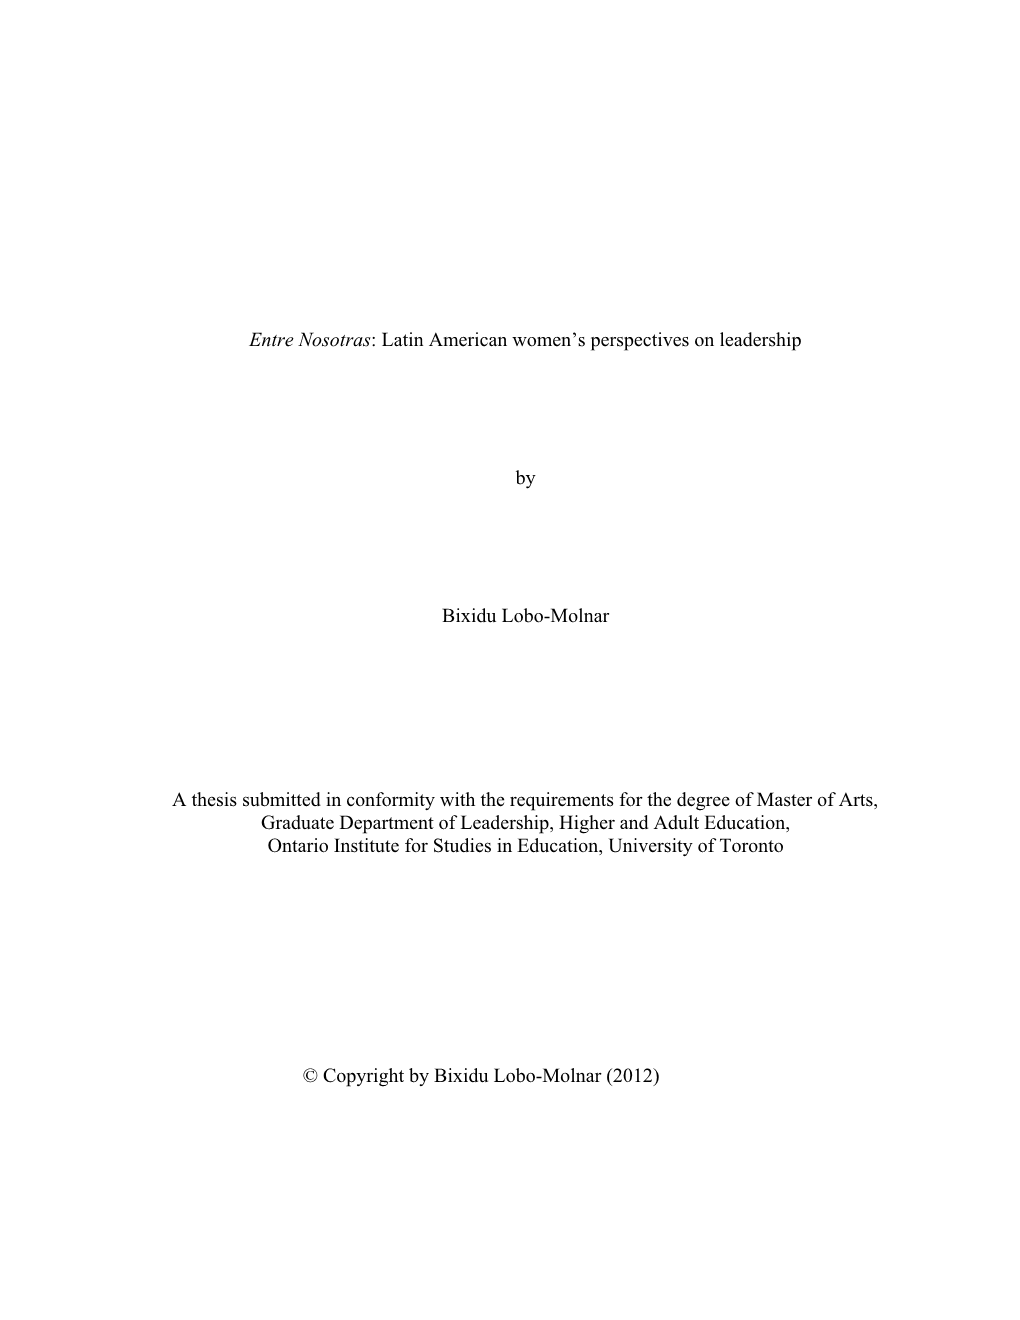 Entre Nosotras: Latin American Women's Perspectives on Leadership by Bixidu Lobo-Molnar a Thesis Submitted in Conformity With